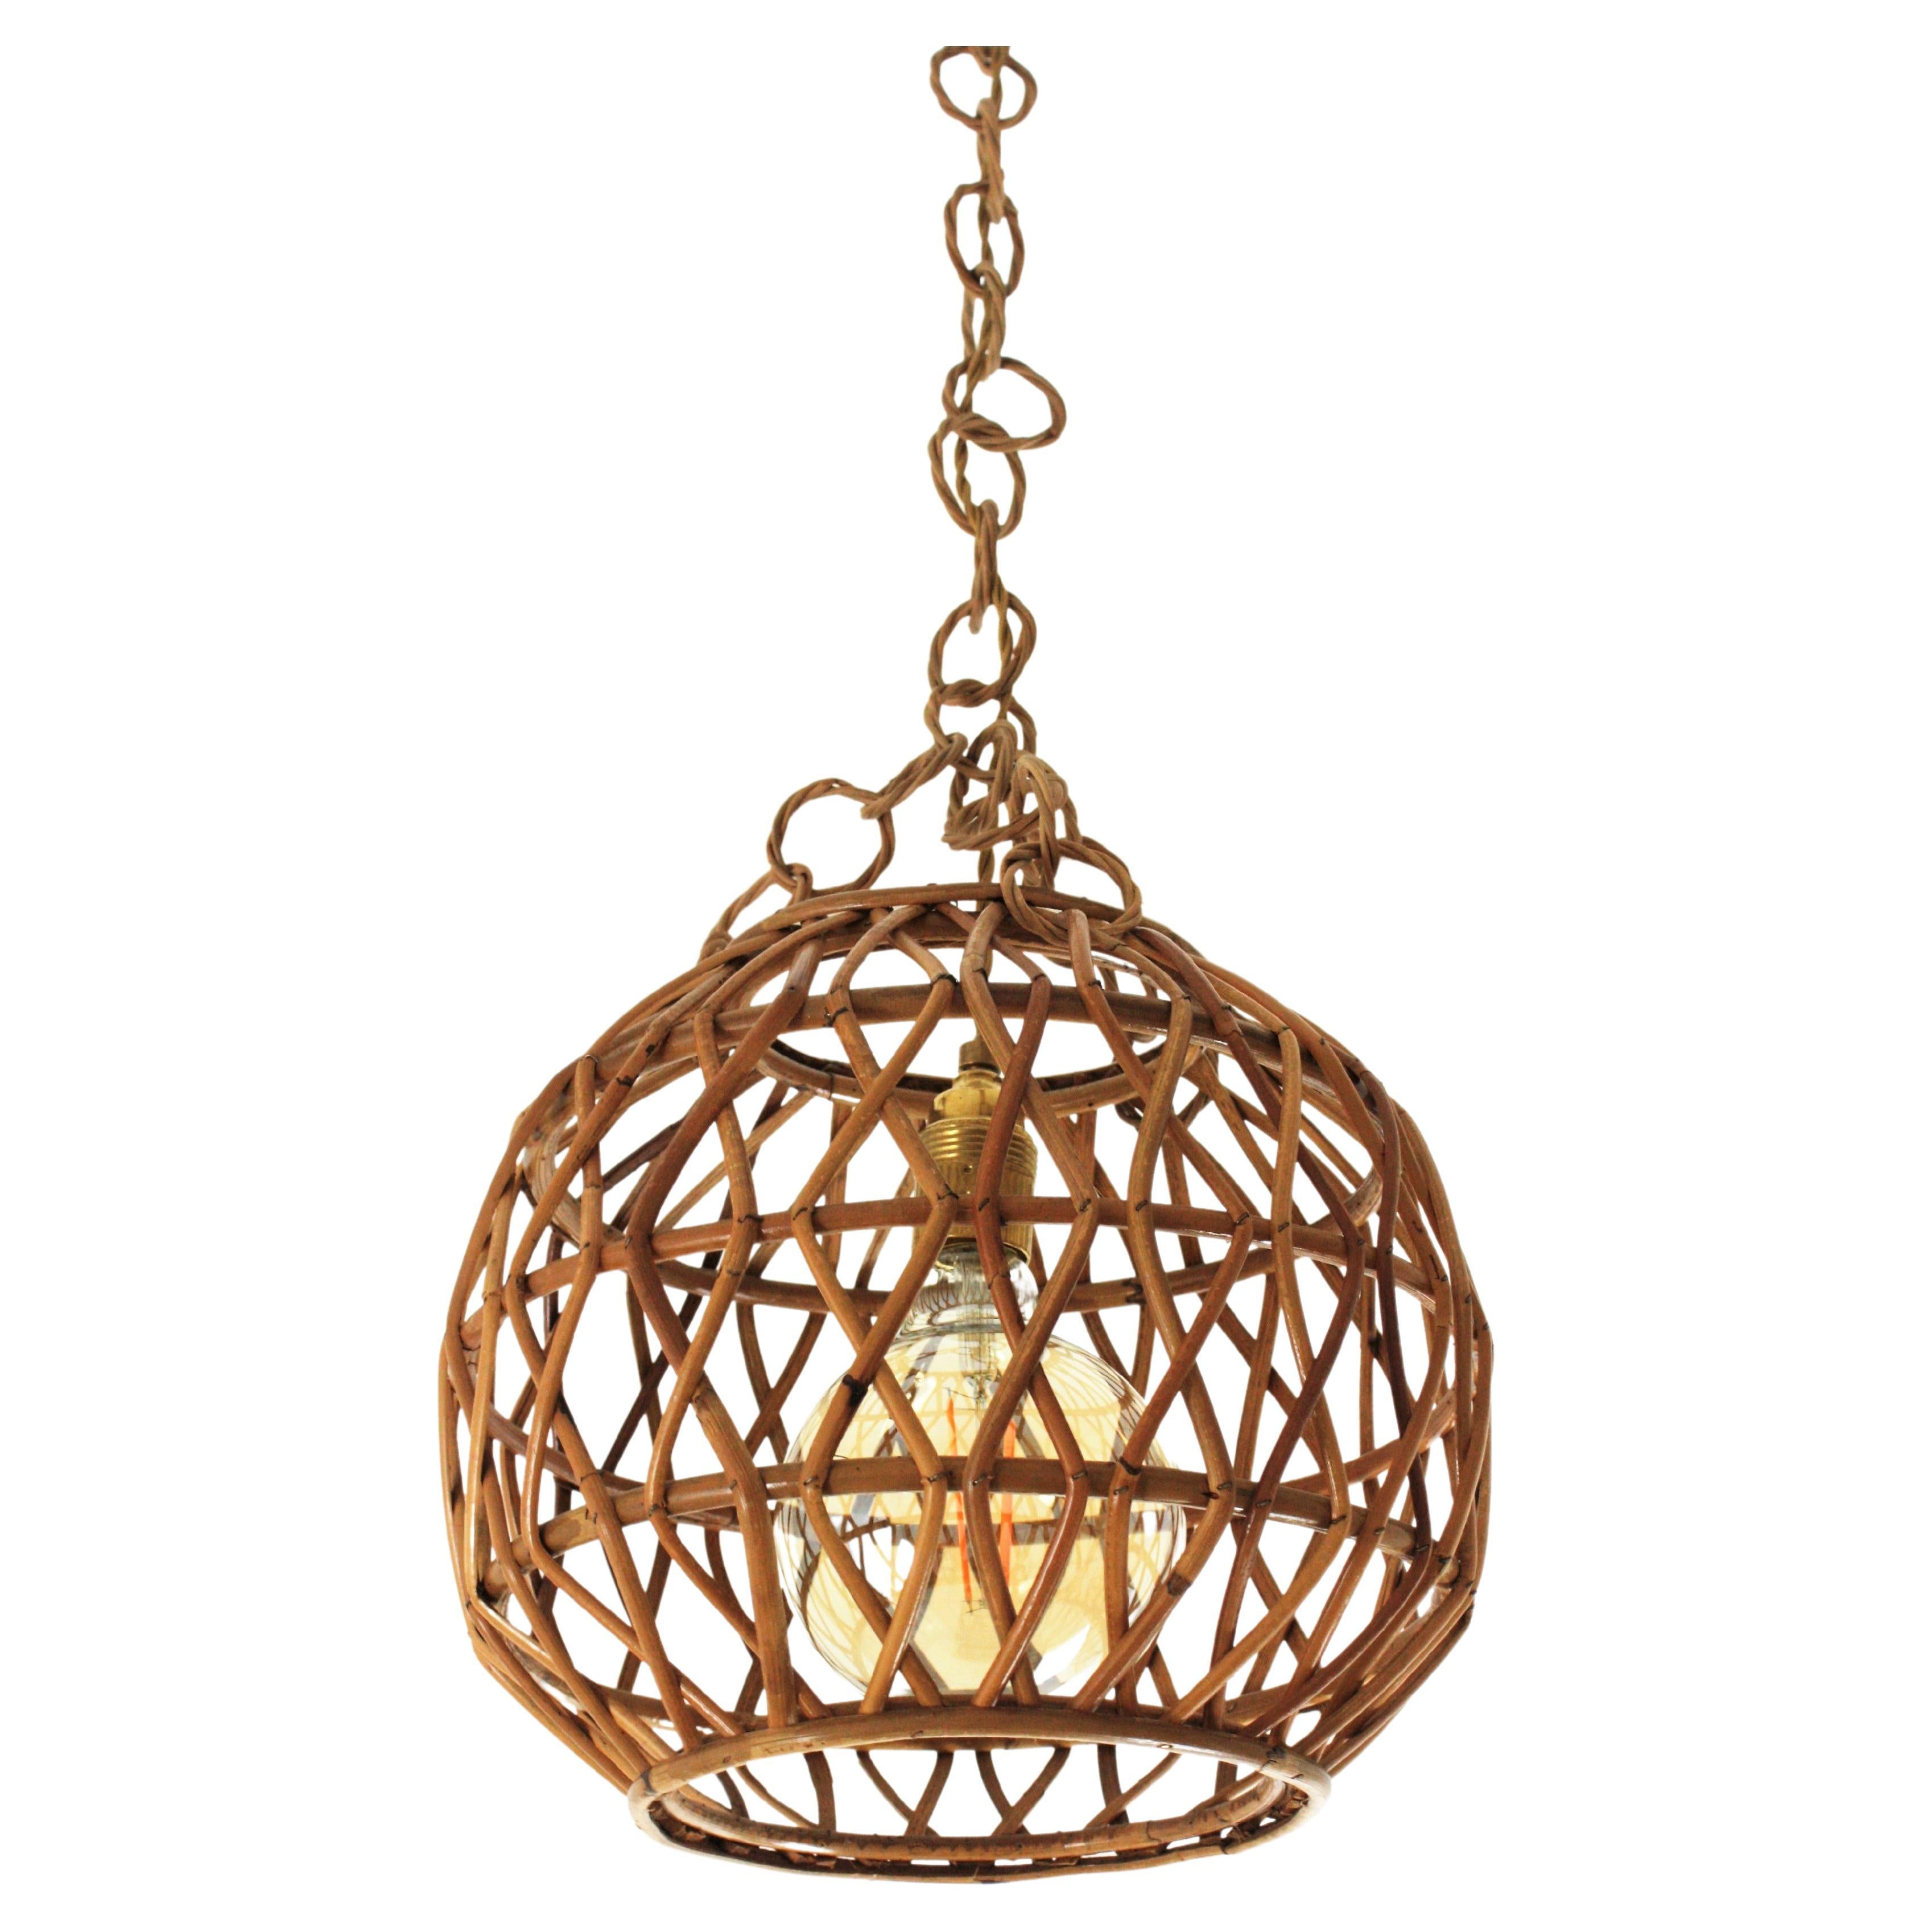 Mid-Century Modern rattan ball shaped lantern or pendant ceiling lamp. Italy, 1950s-1960s.
This suspension features an spherical lampshade made of double twist rattan canes. It hangs from a chain with wicker links topped by a brass canopy. The